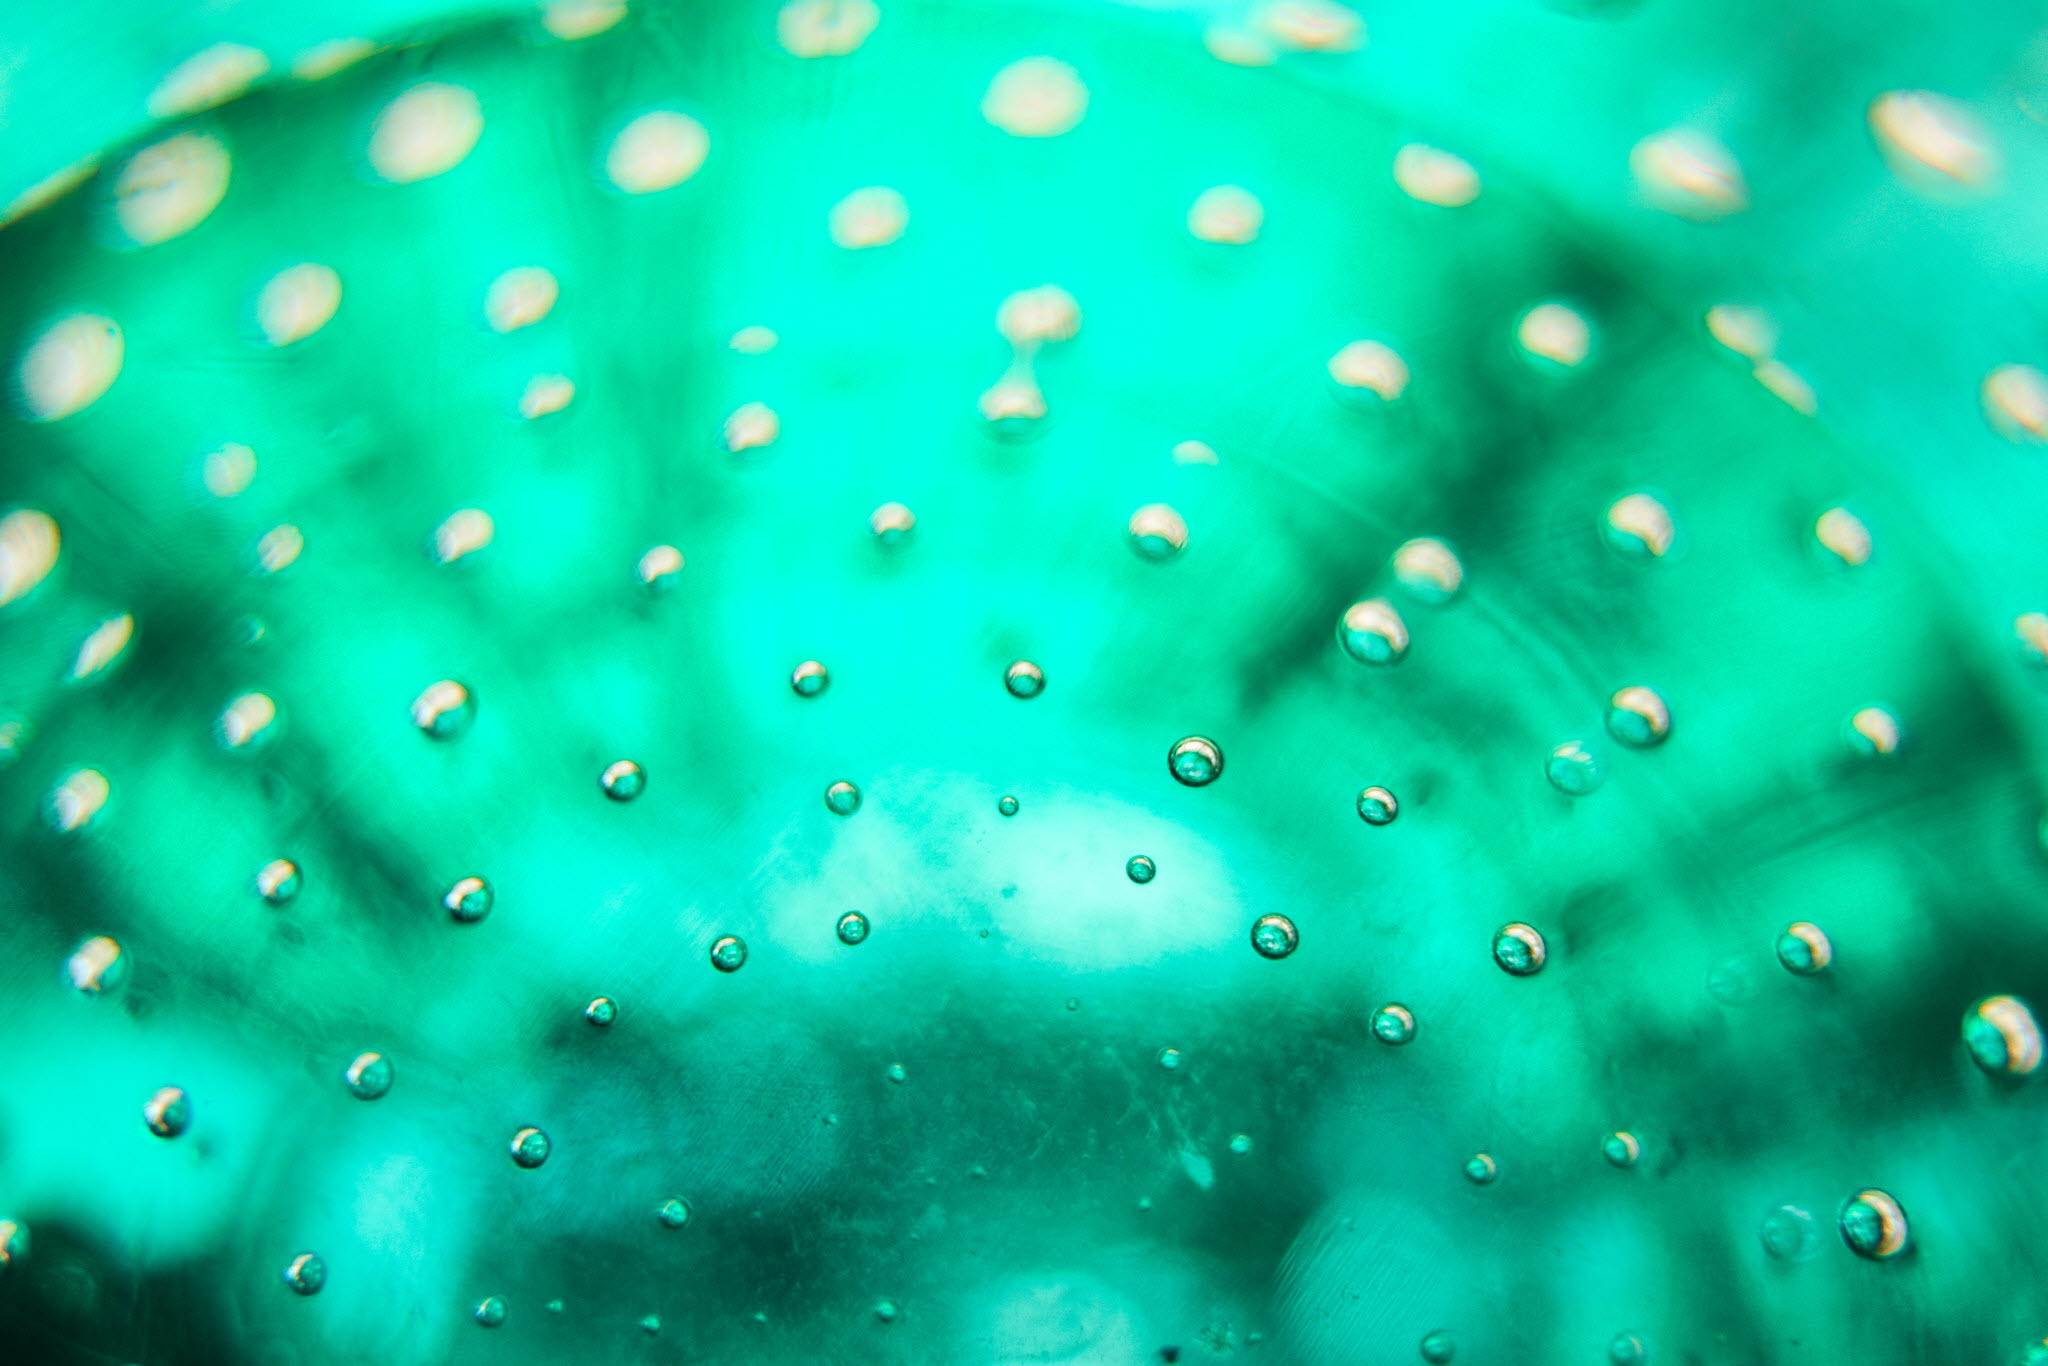 A green glass plate with a bubbly pattern.